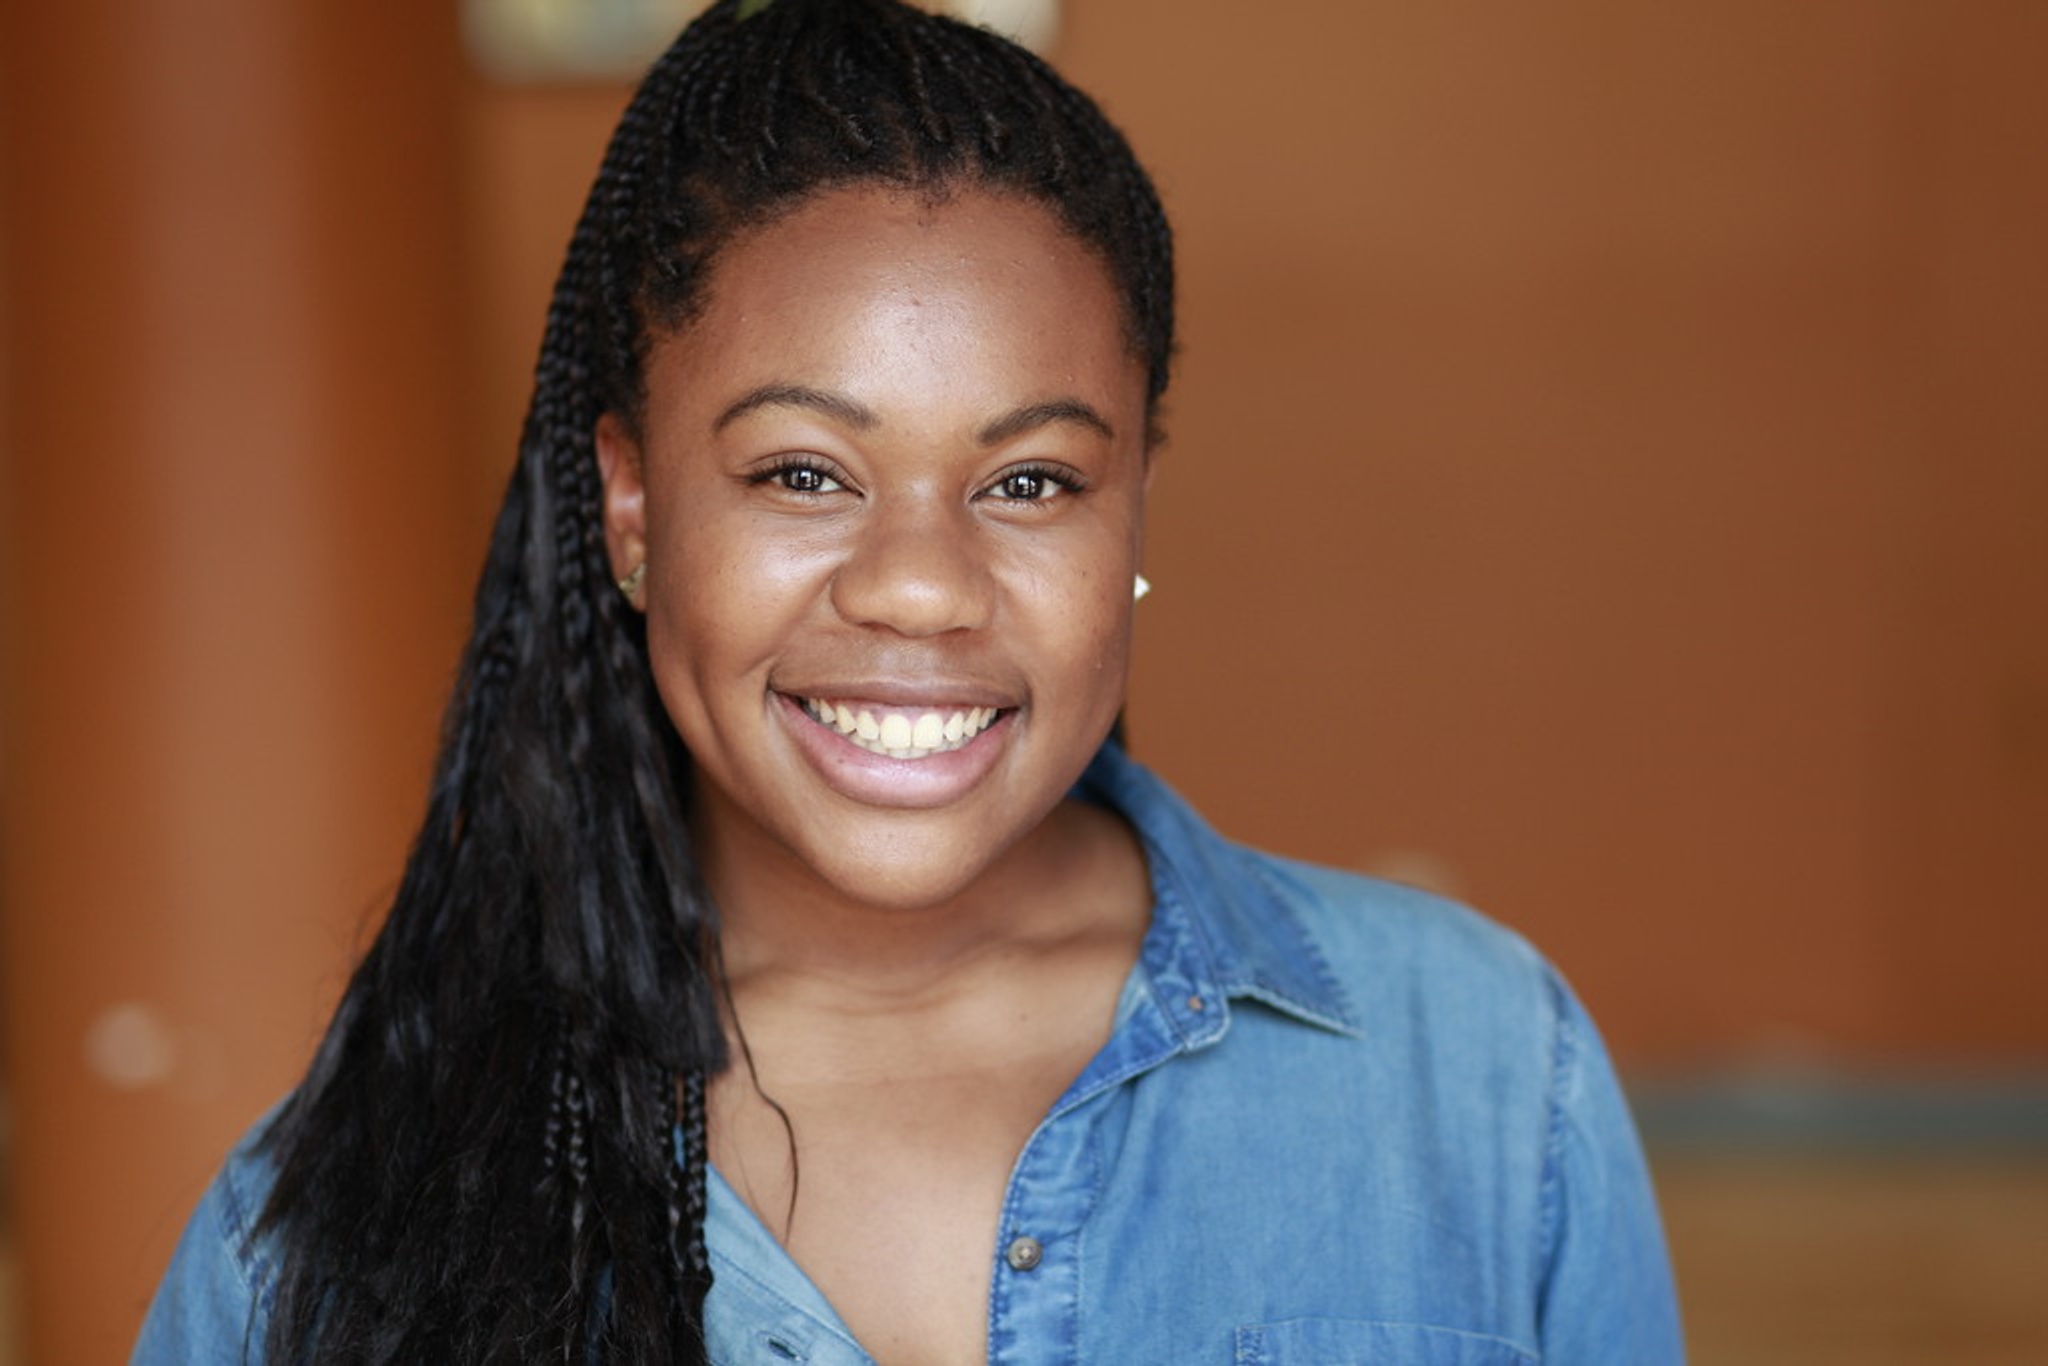 A Black woman with long hair swept over her right shoulder smiling and wearing a denim button down shirt against a blurry brown-orange wall in the background